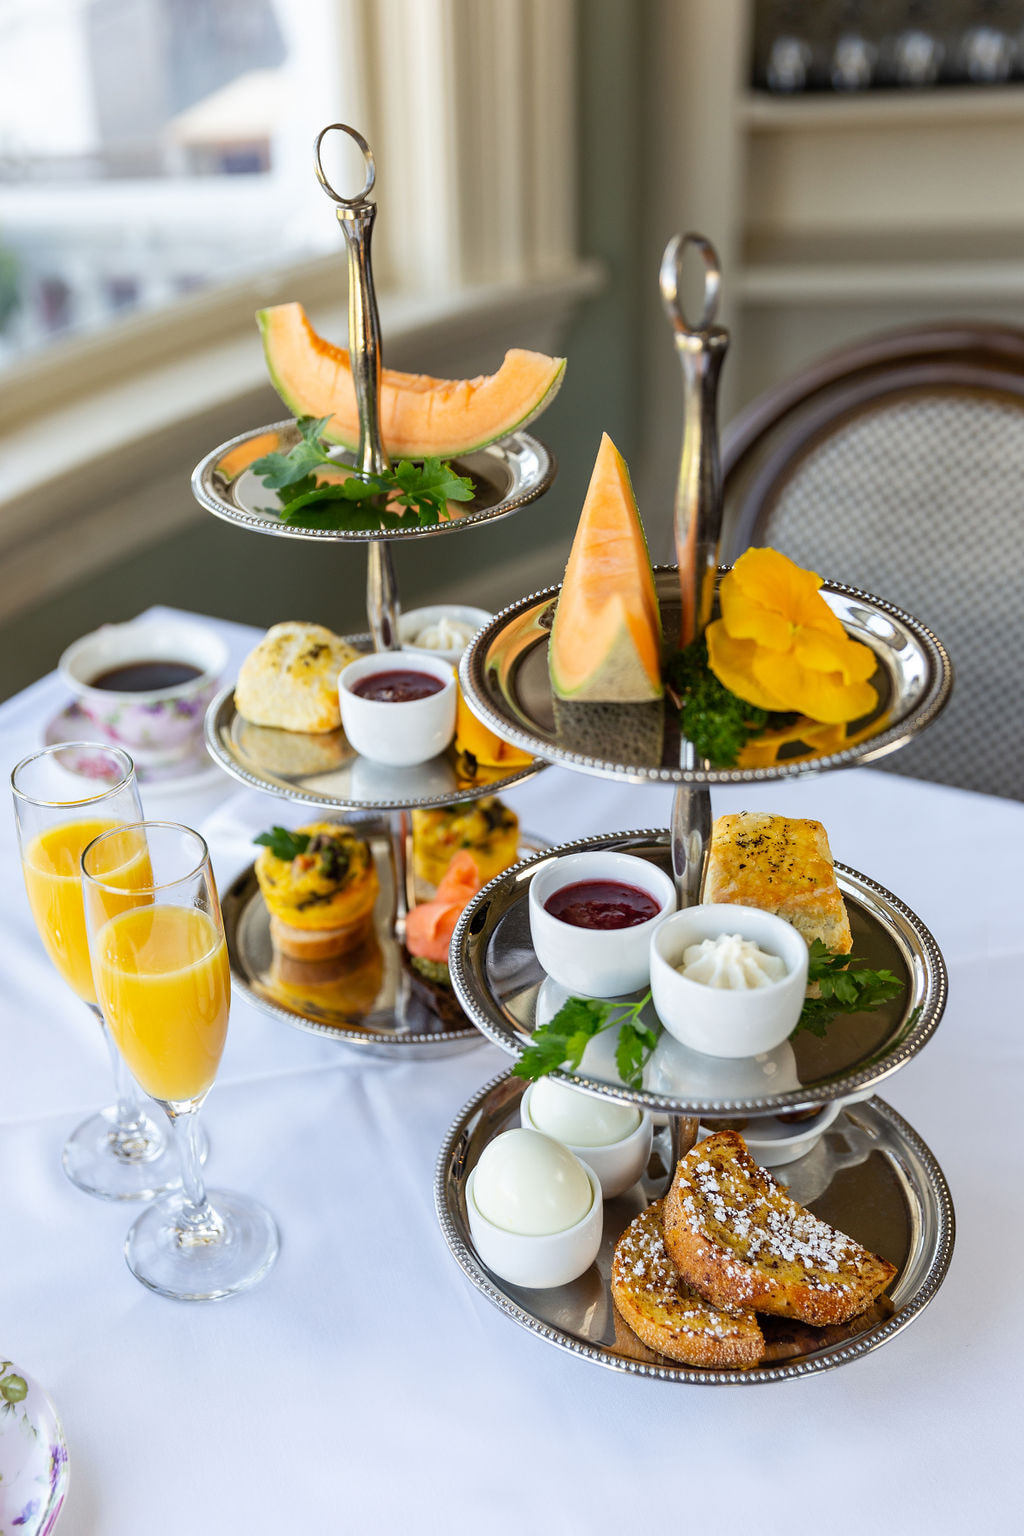 Complimentary Breakfast Served Daily in an English Three-Tiered Style